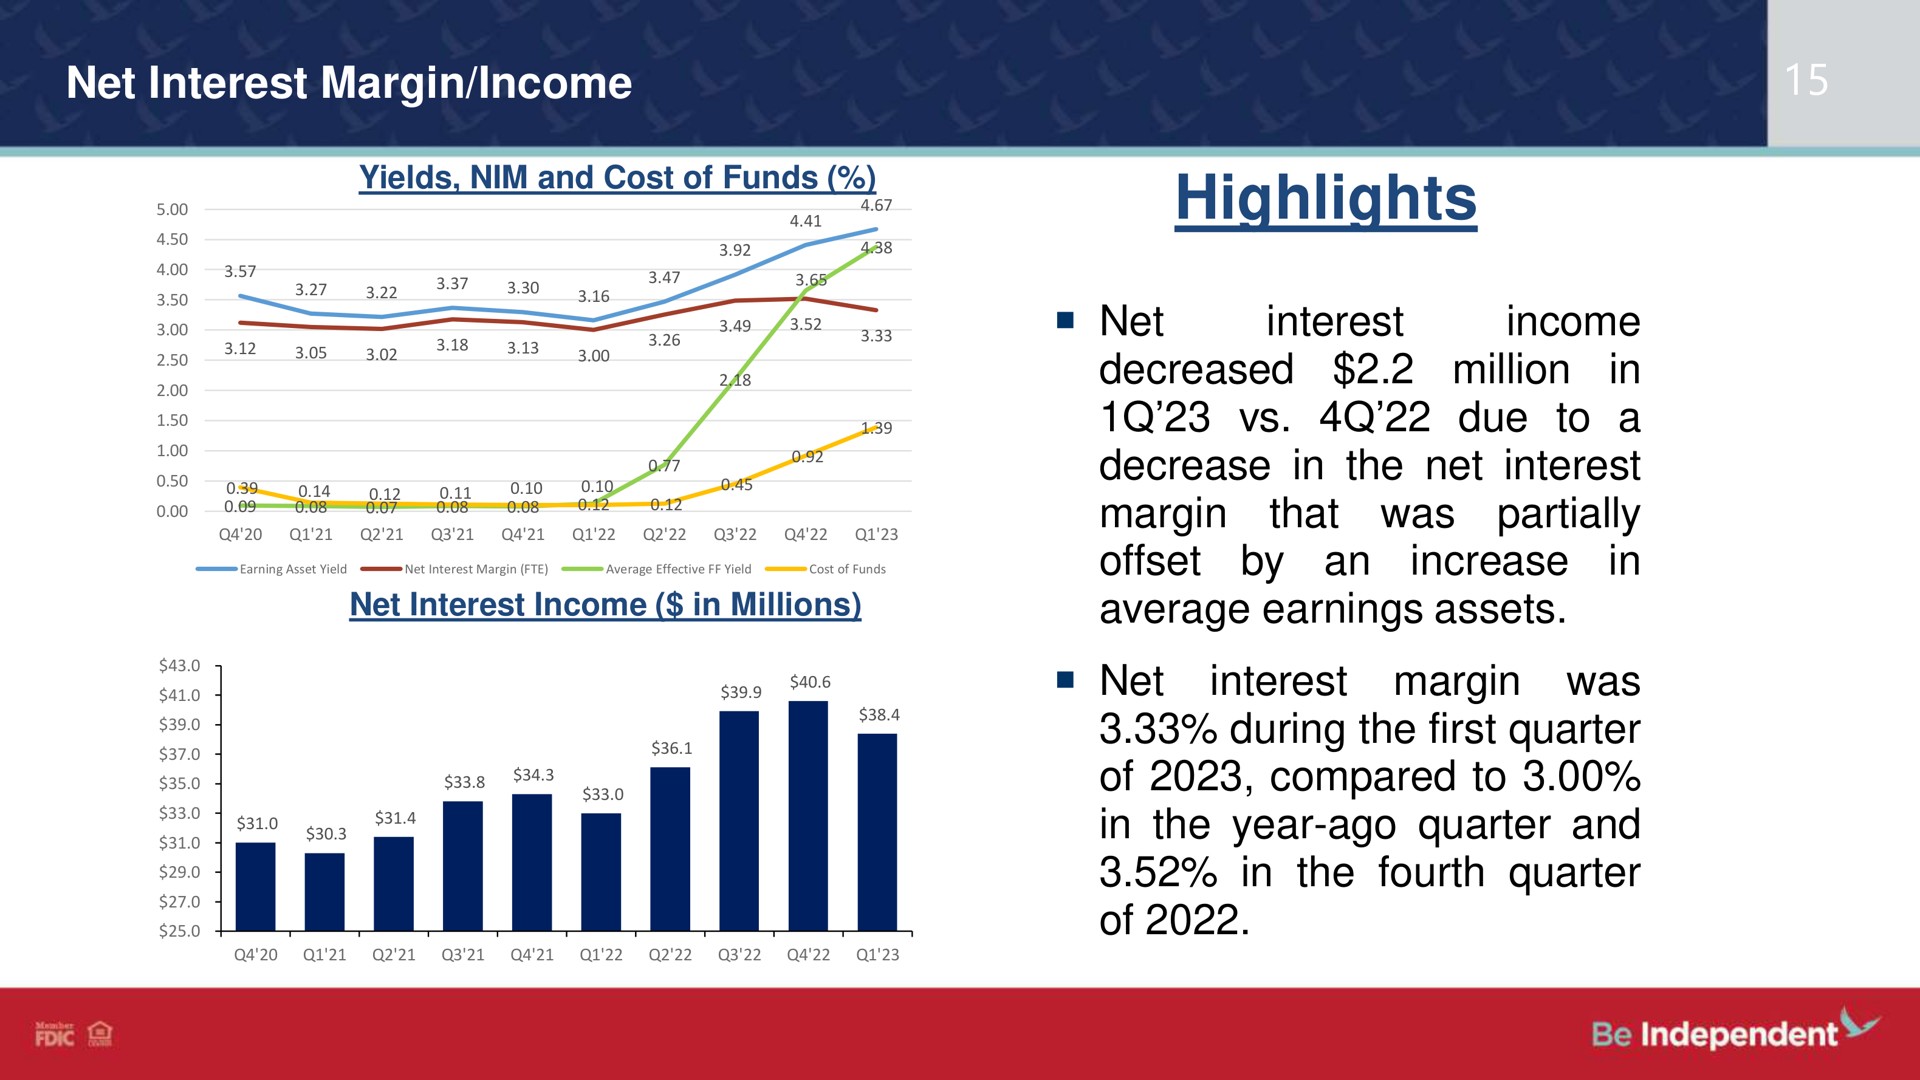 net interest margin income highlights net interest income decreased million in due to a decrease in the net interest margin that was partially offset by an increase in average earnings assets net interest margin was during the first quarter of compared to in the year ago quarter and in the fourth quarter of on cost funds eve millions i i bee i | Independent Bank Corp